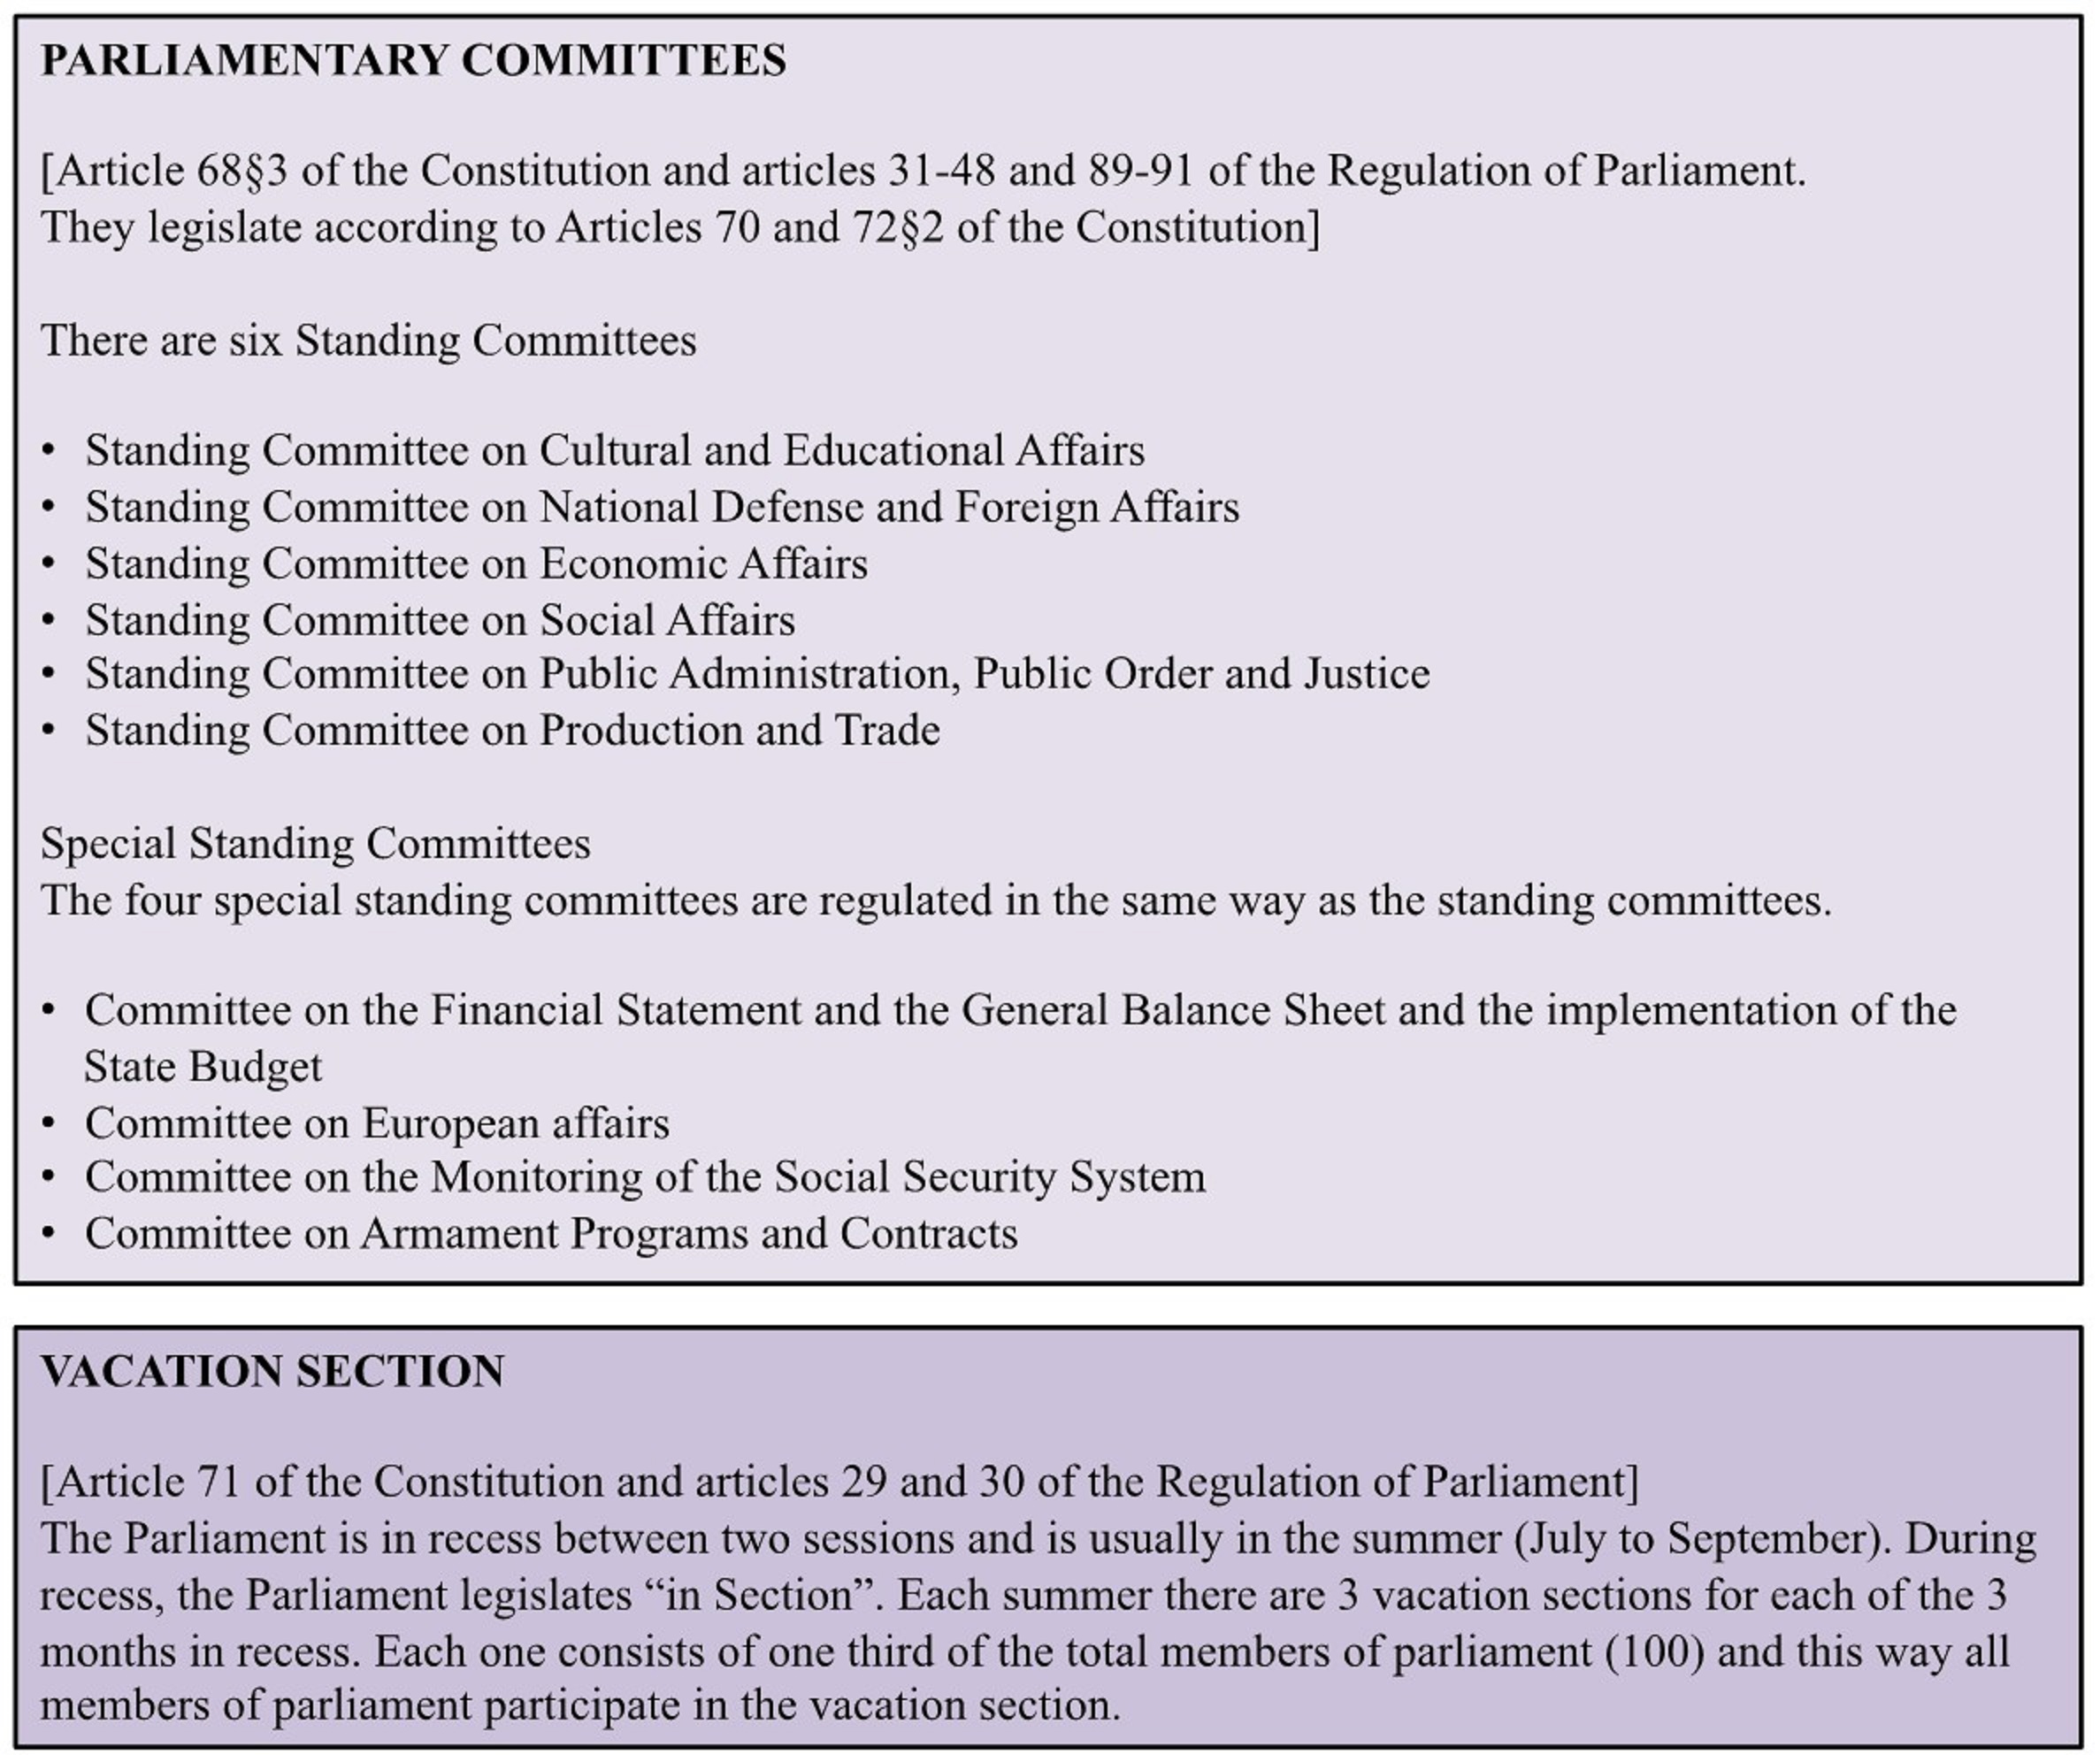 Parliamentary Committees